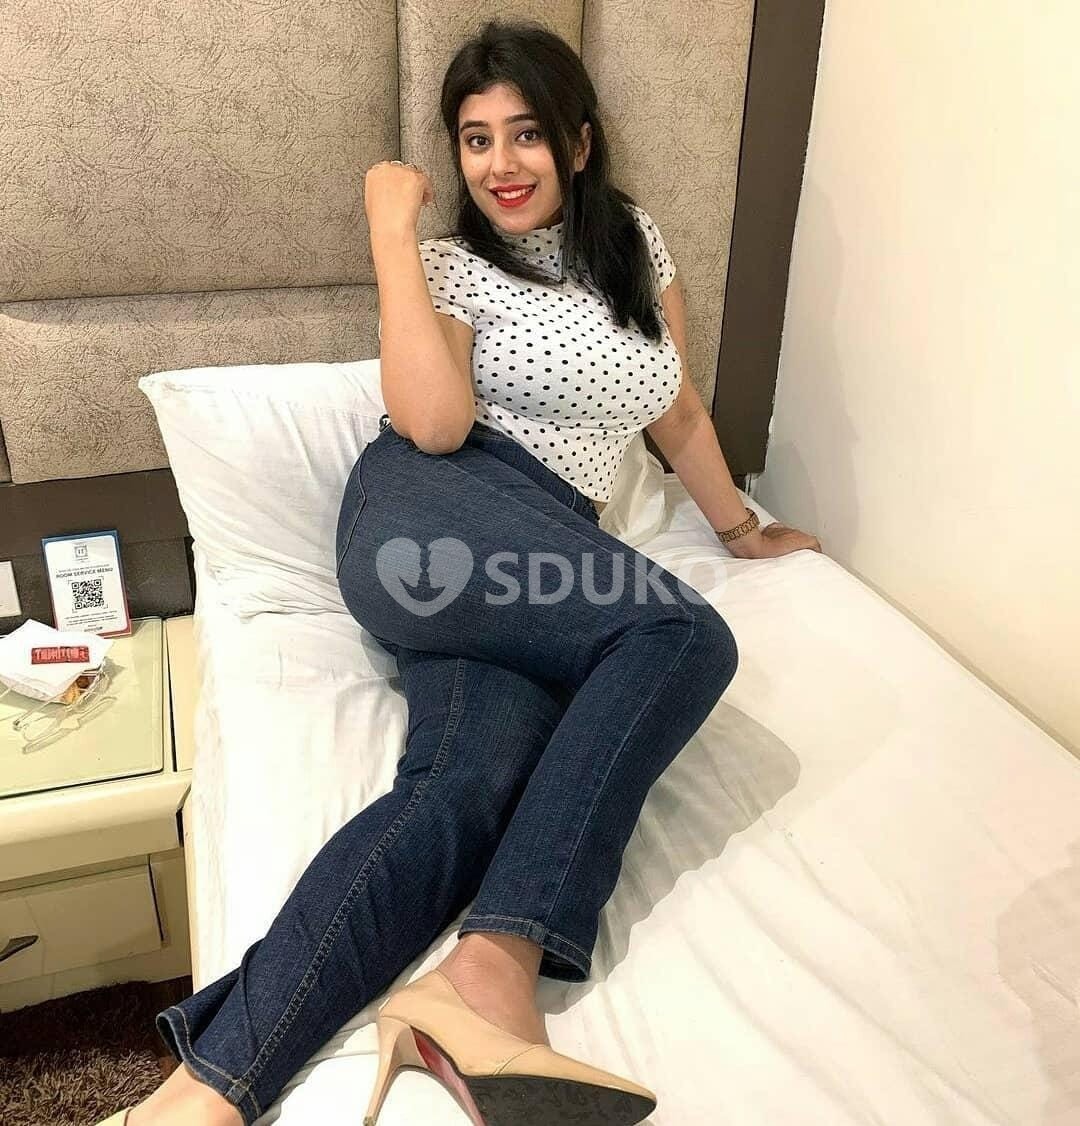 JUBILEE HILLS HYDERABAD ...MYSELF SWETA CALL GIRL & BODY-2-BODY MASSAGE SPA SERVICES OUTCALL OUTCALL INCALL 24 HOURS...